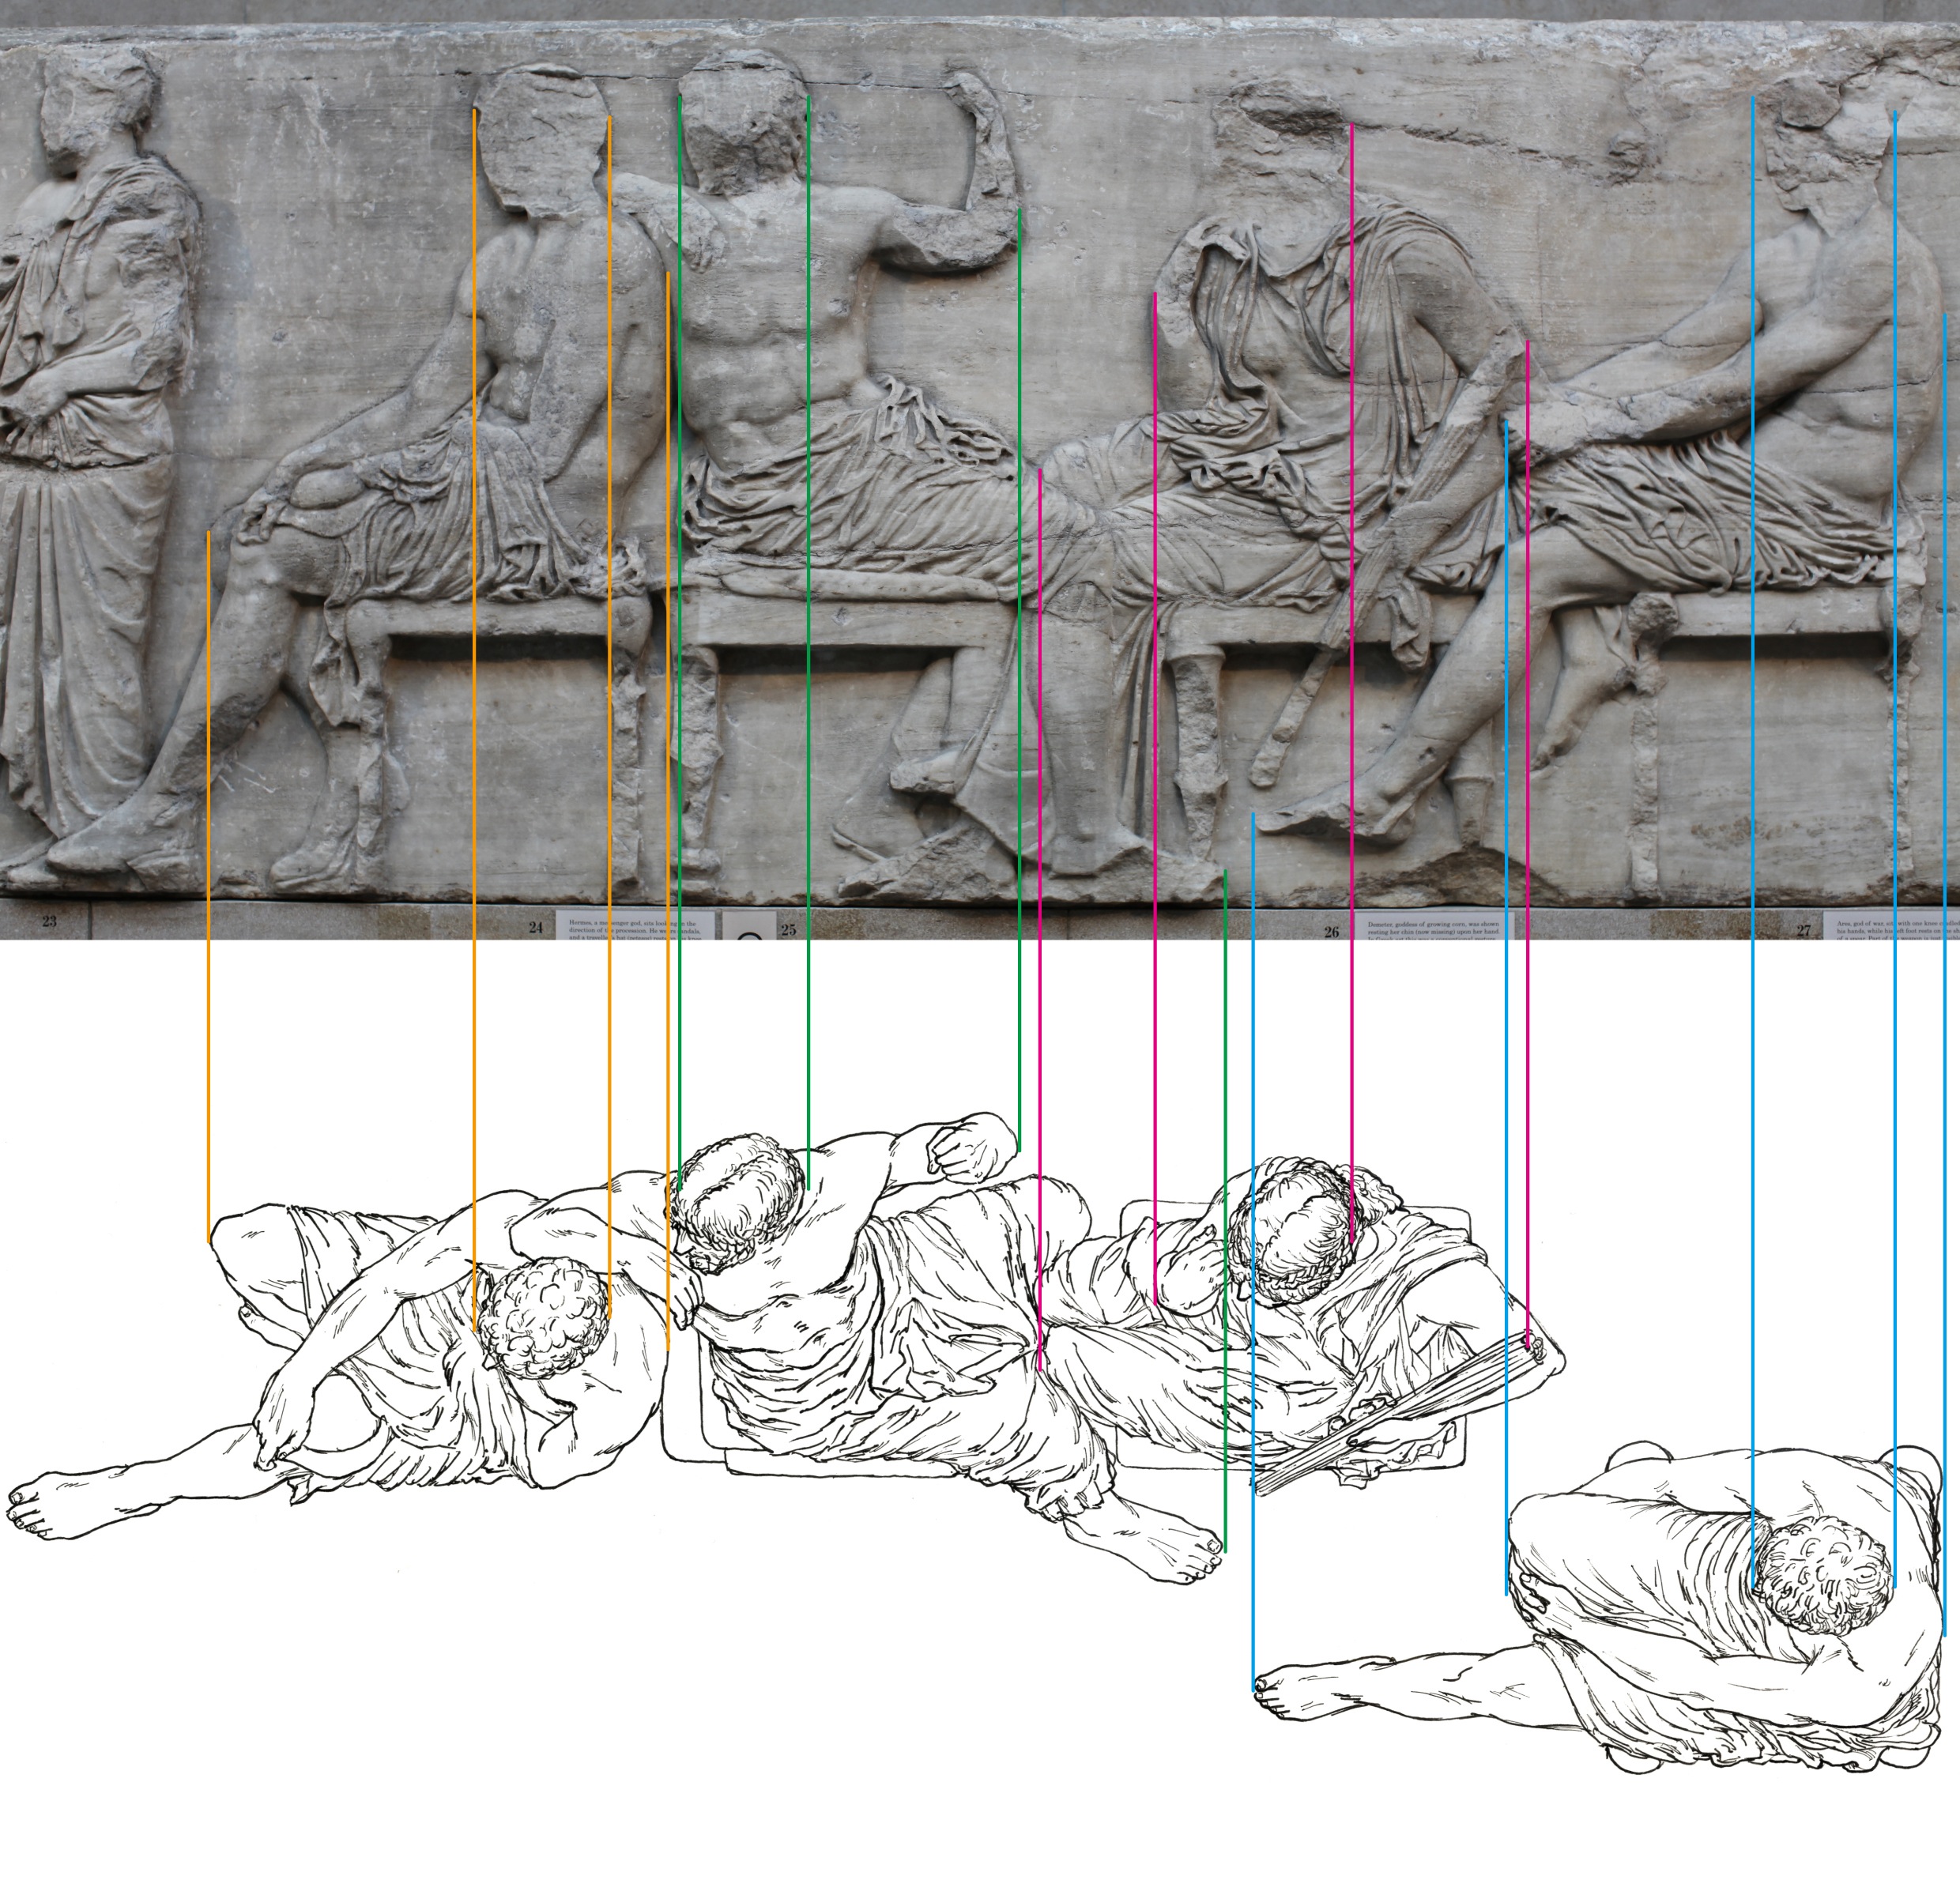 black and white photograph of gods on Parthenon frieze, with drawing of them as if 3D from above